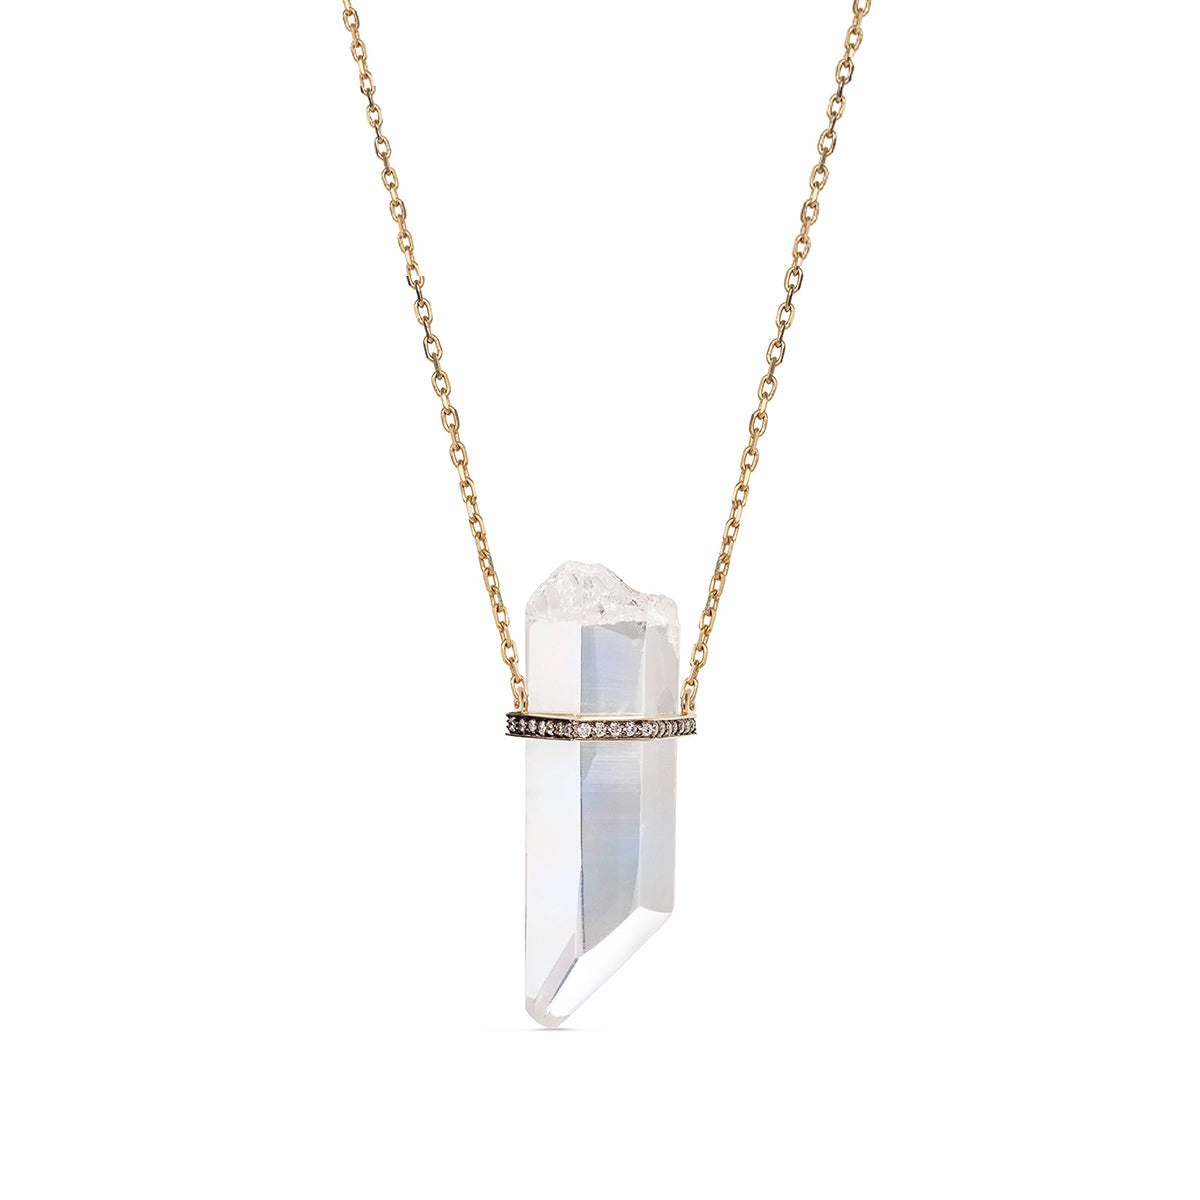 Crystal Rock Pendant Necklaces | Beauty And Her Bears